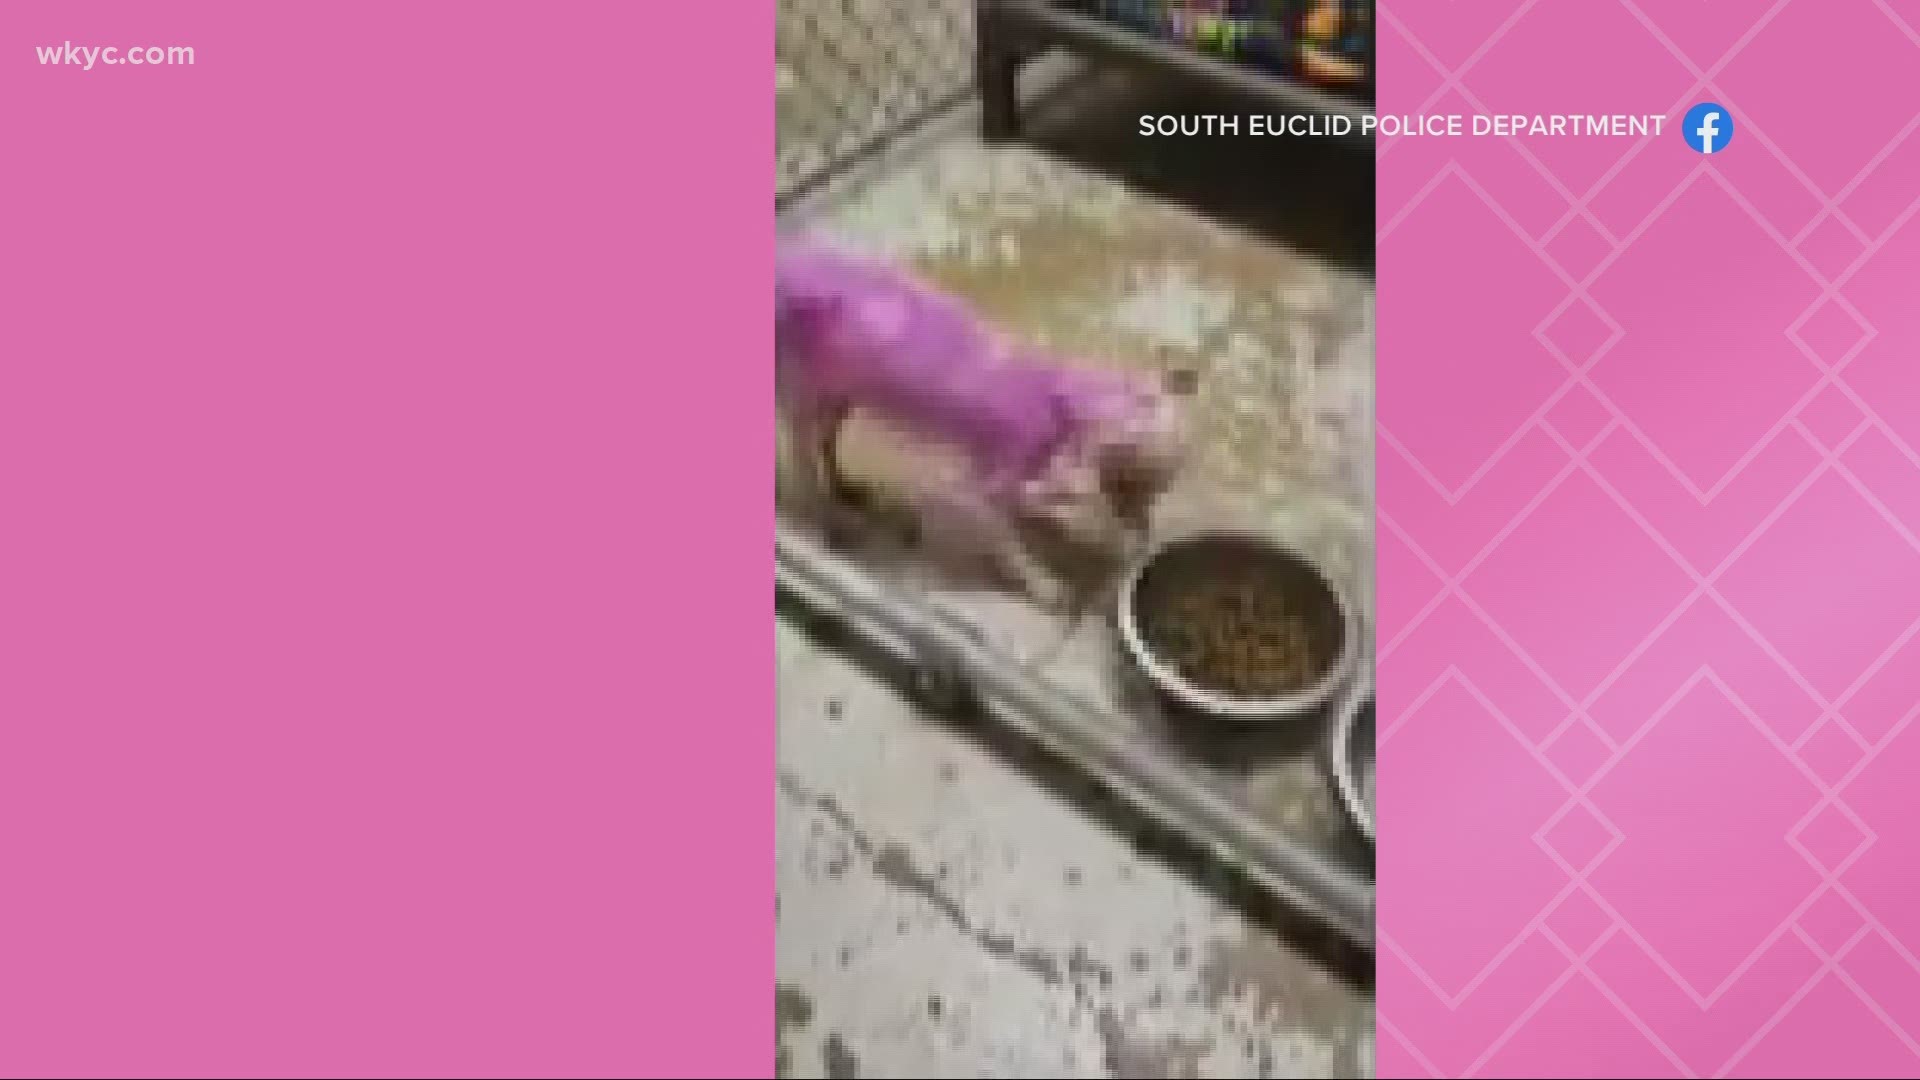 An investigation is underway after a malnourished, pink-painted dog was found running loose near College Road in South Euclid. Anybody with info should call police.